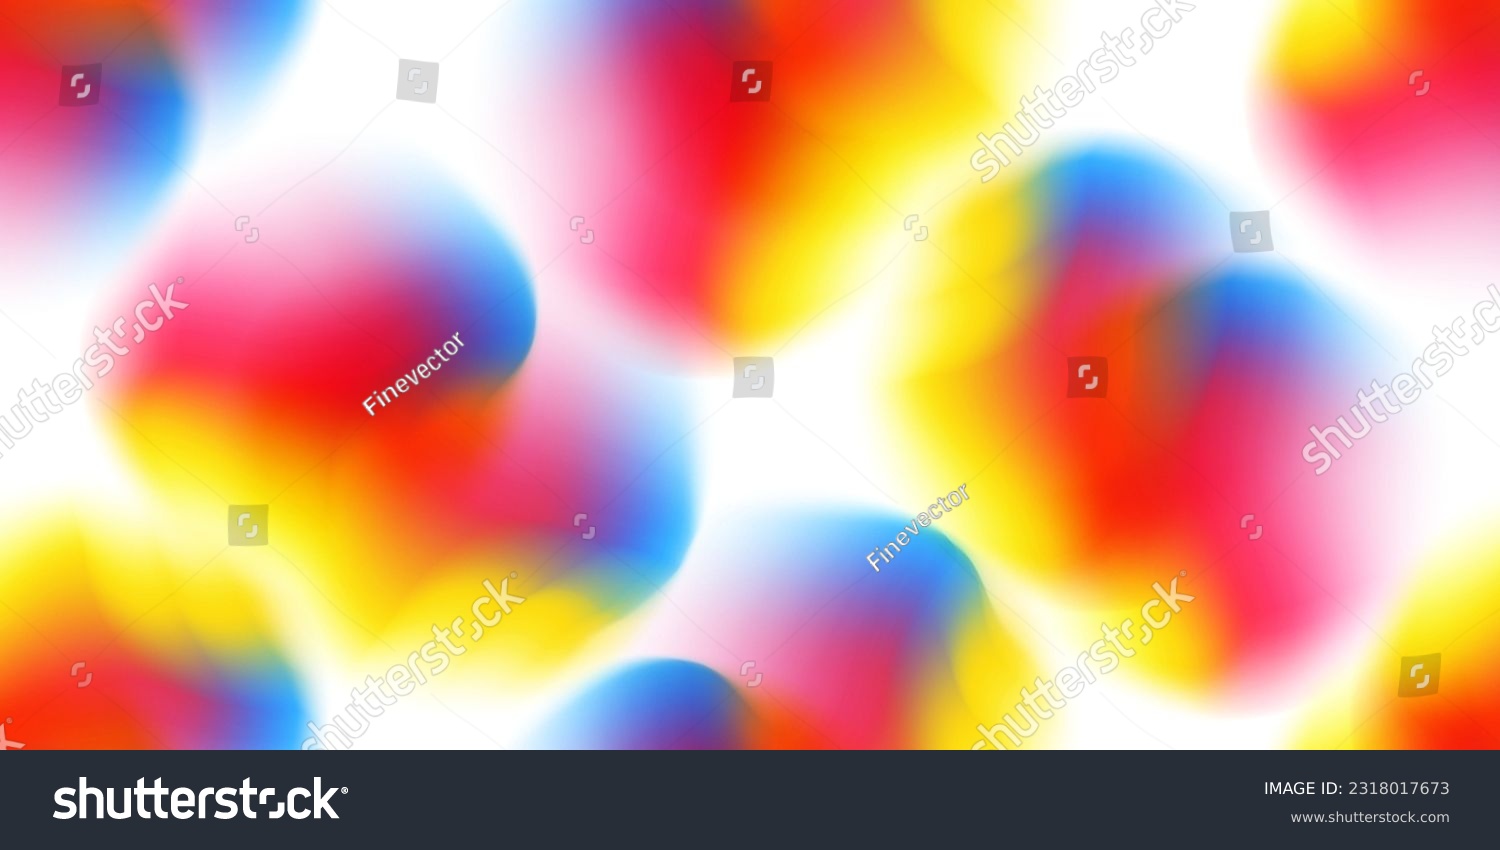 Blurred circles seamless pattern. Vibrant gradient defocused round shapes for textile, fabric and wallpapers design. Yellow, red, blue. Vector illustration. #2318017673